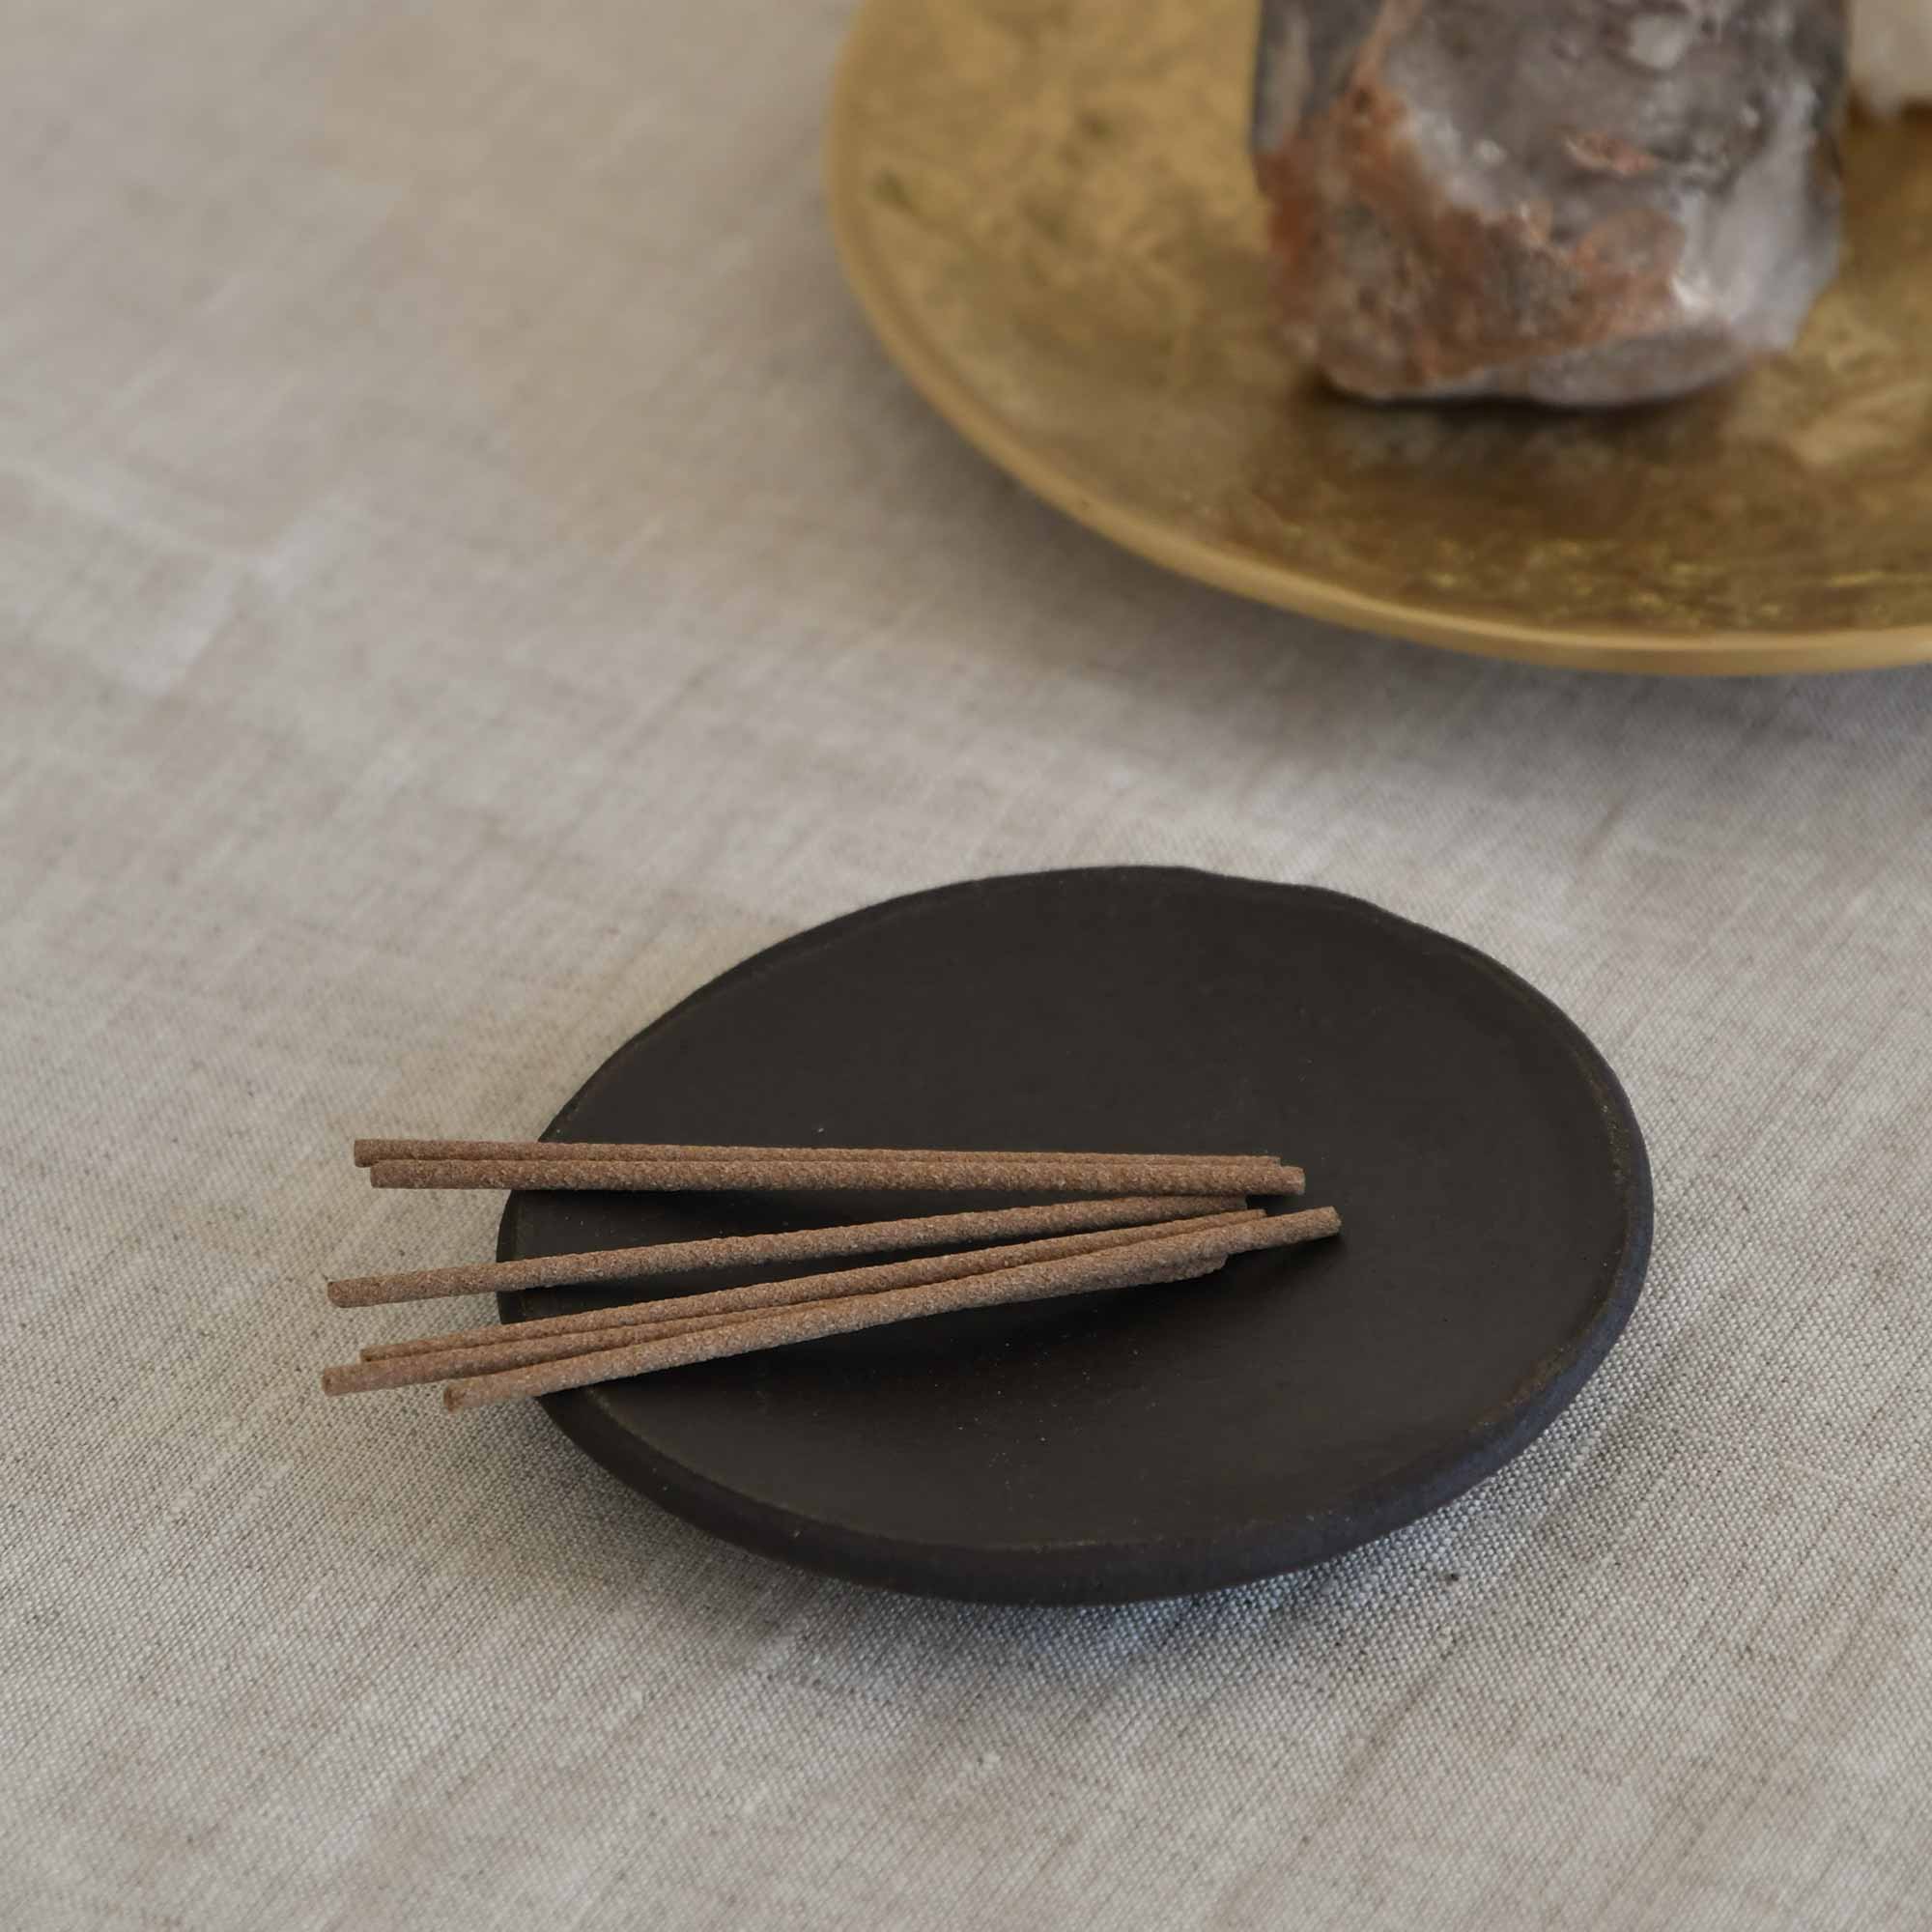 several Japanese incense on the ceramic incense plate